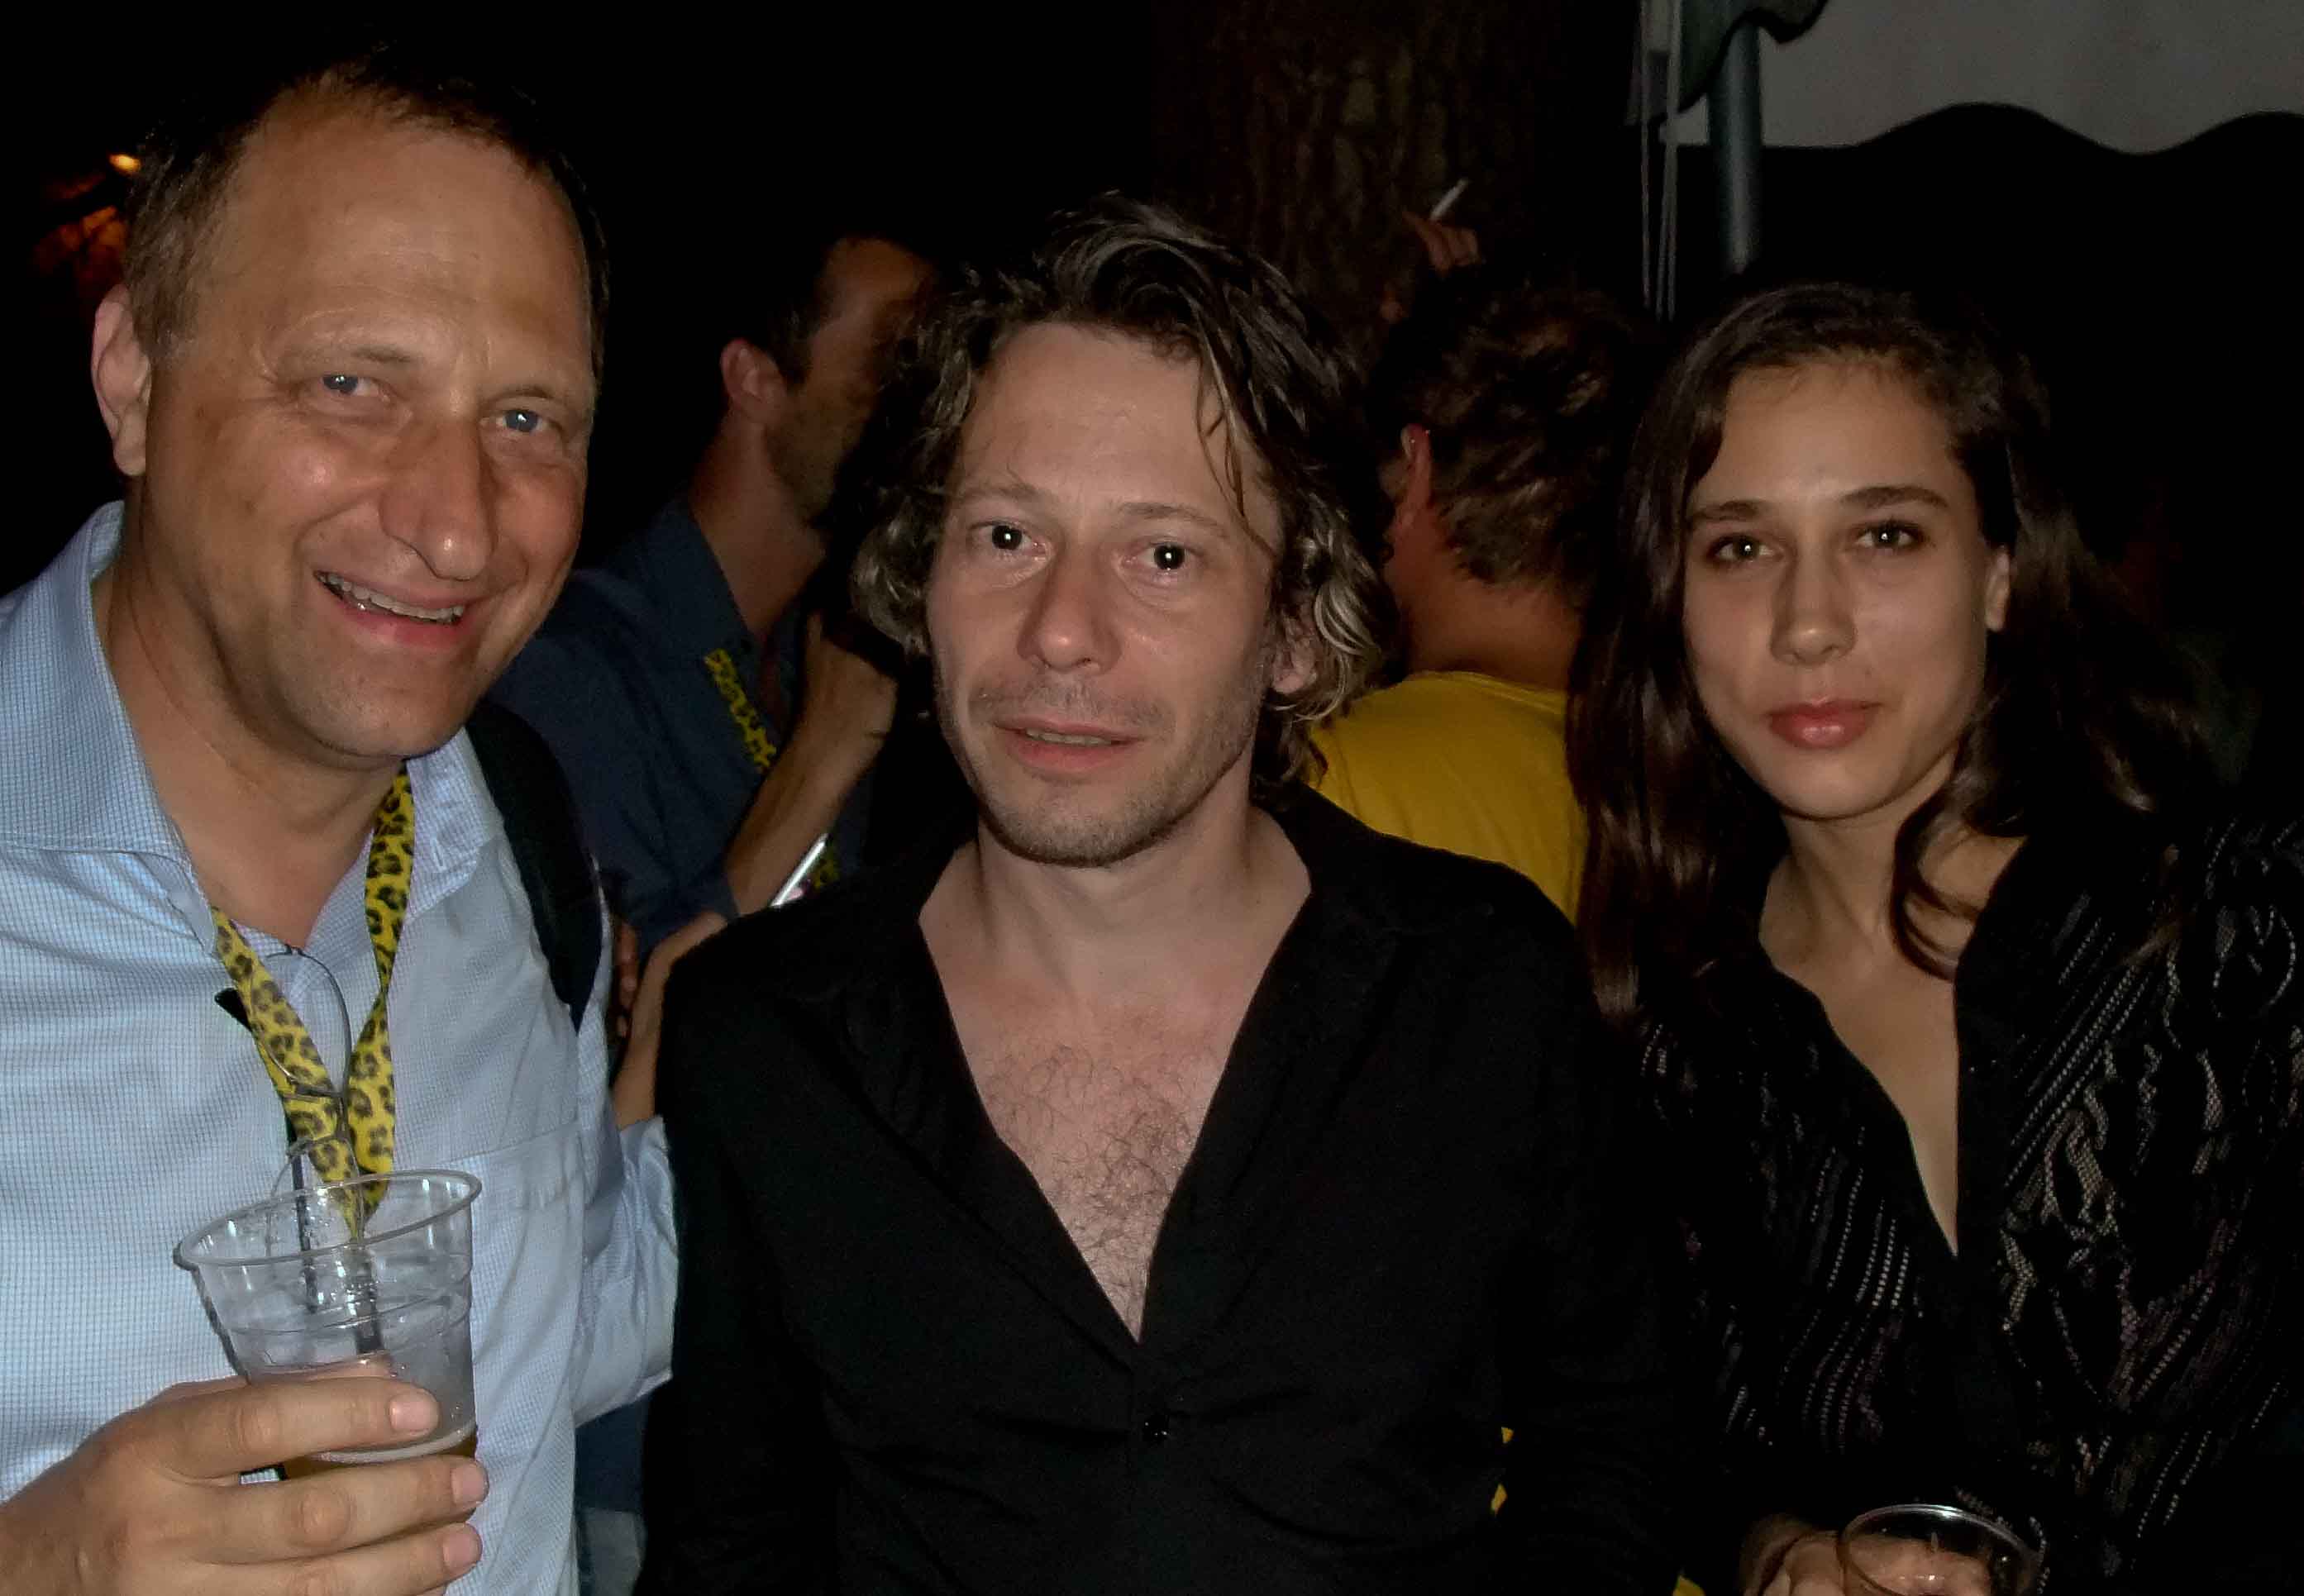 Fritz Muri, Mathieu Amalric and Florence Matousek at the Locarno Filmfestival